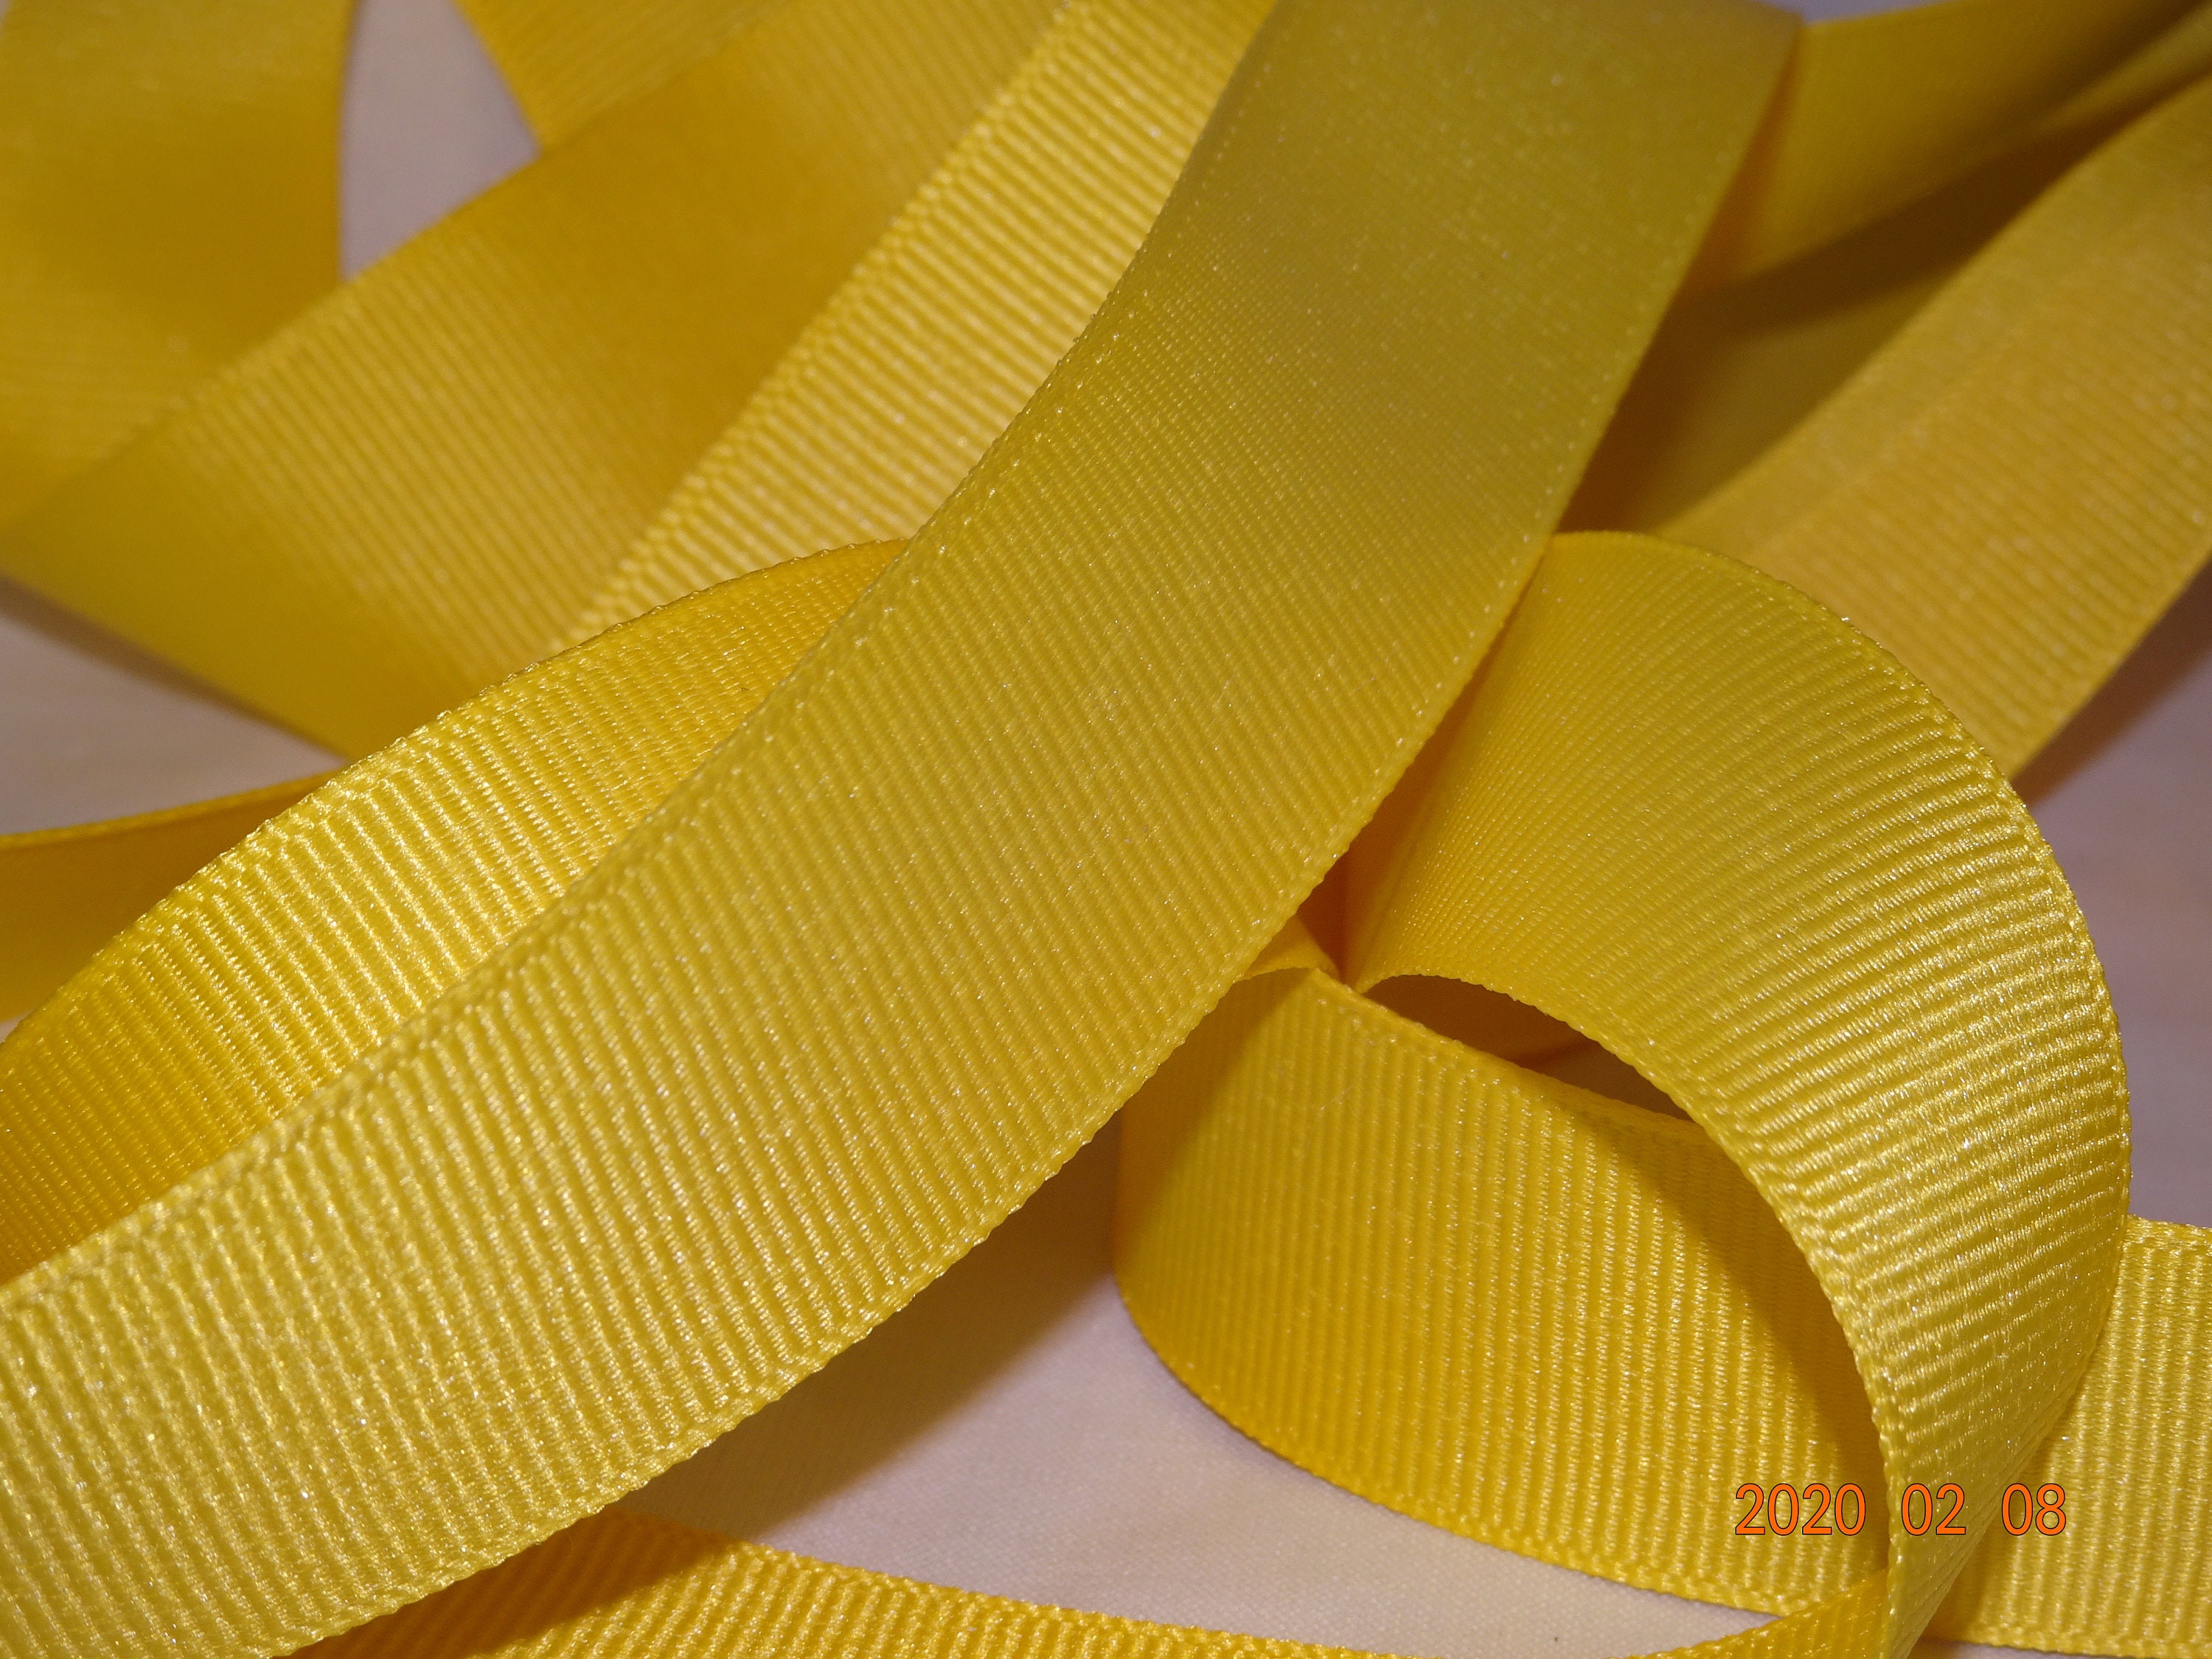 5 Yards Old Gold Yellow Grosgrain Ribbon 1/4 Inch Wide Trim Scrapbooking  Embellishment Sewing Ribbon Supplies Mixed Media Card Making 